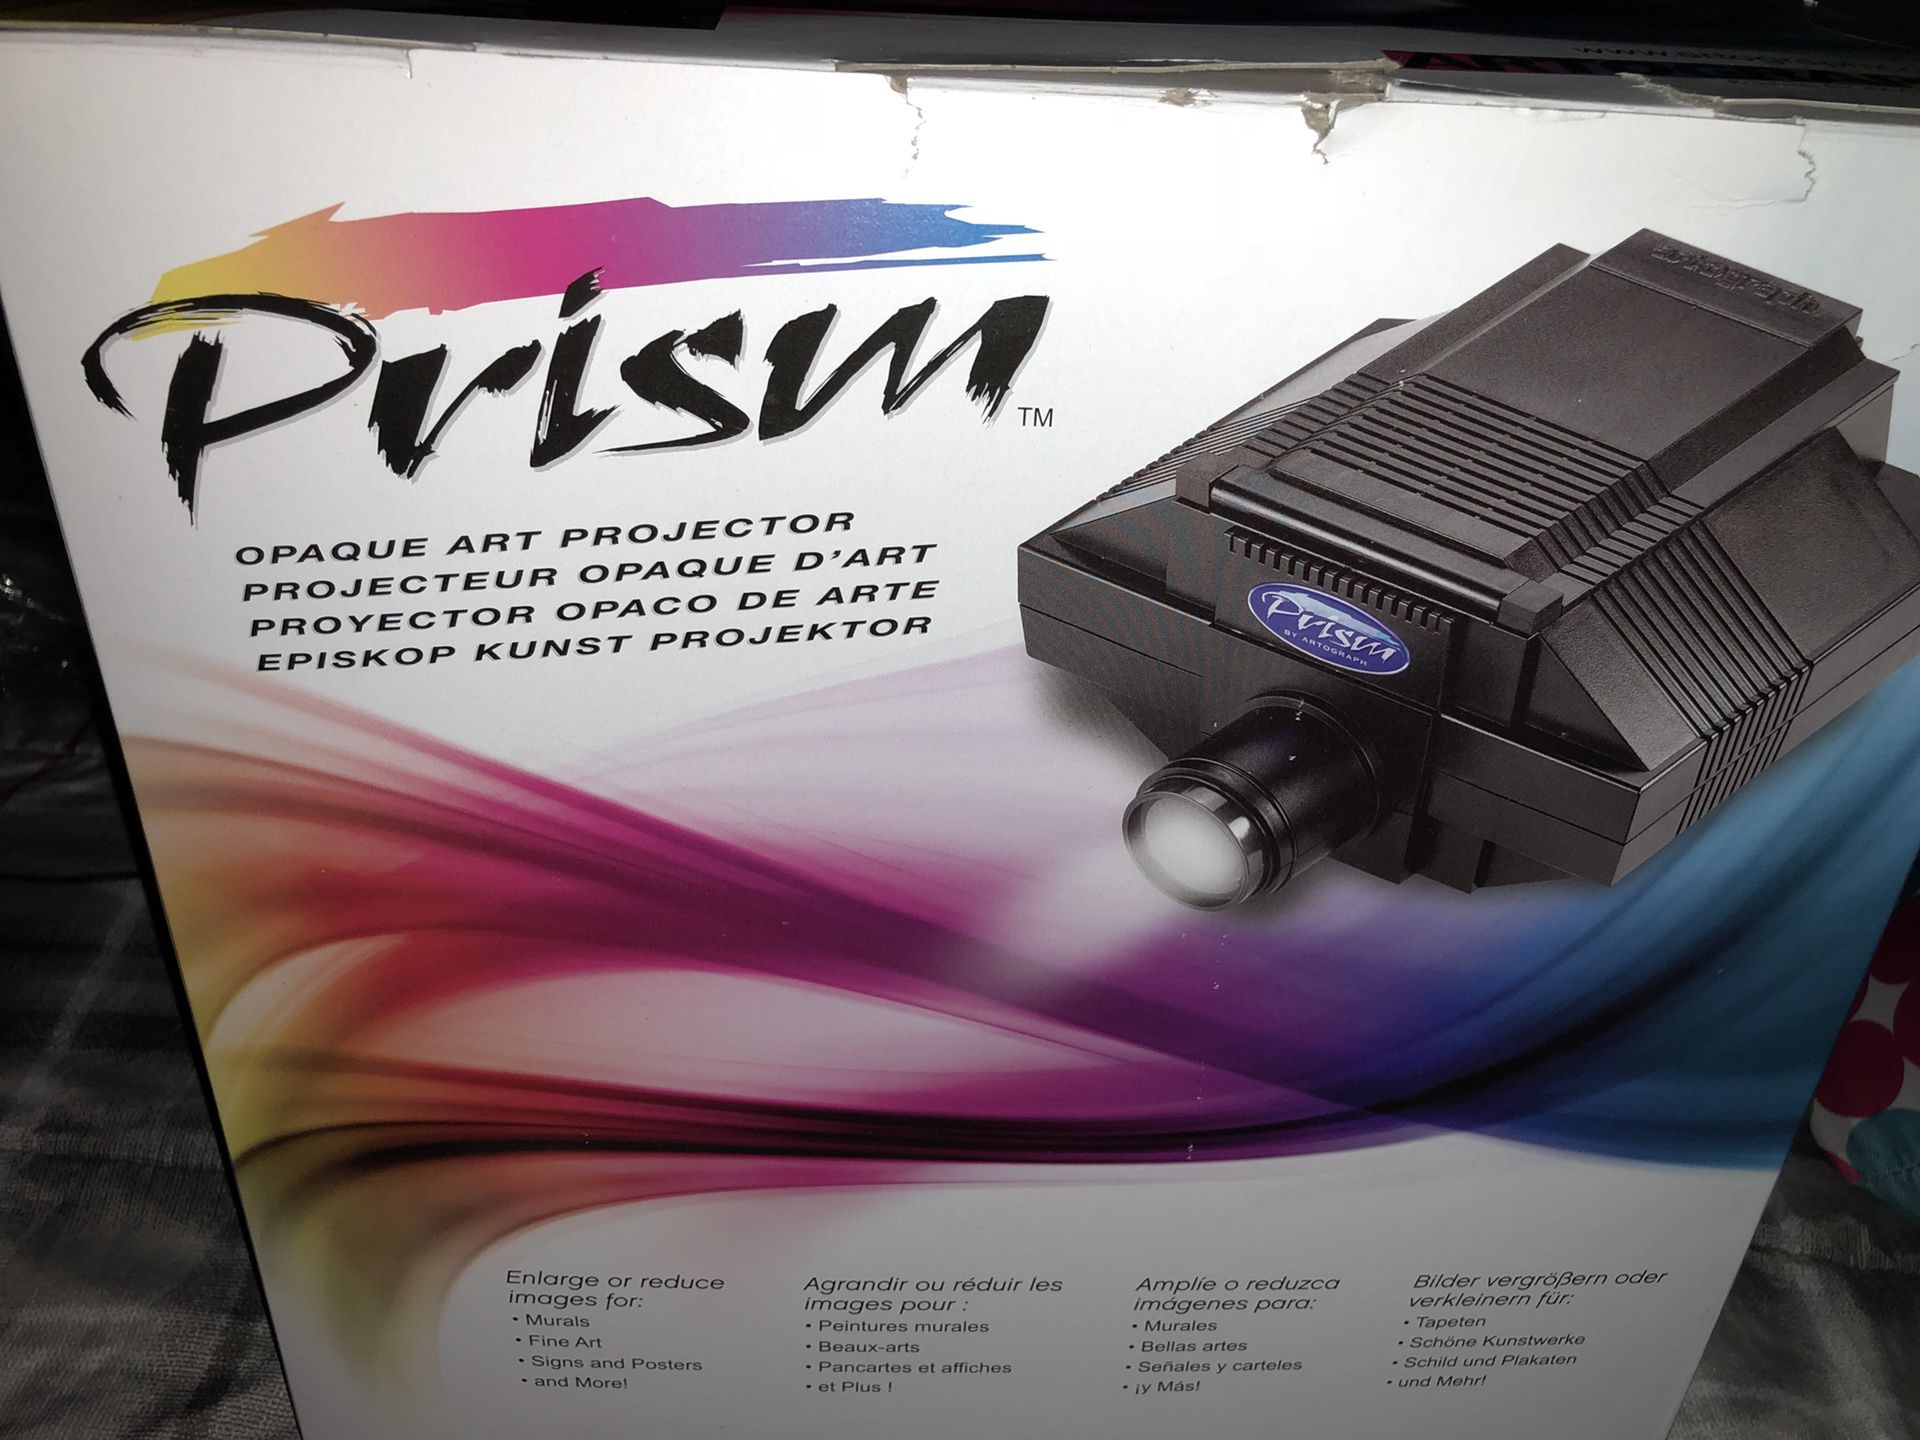 Prism Opaque Art Projector and Accessories